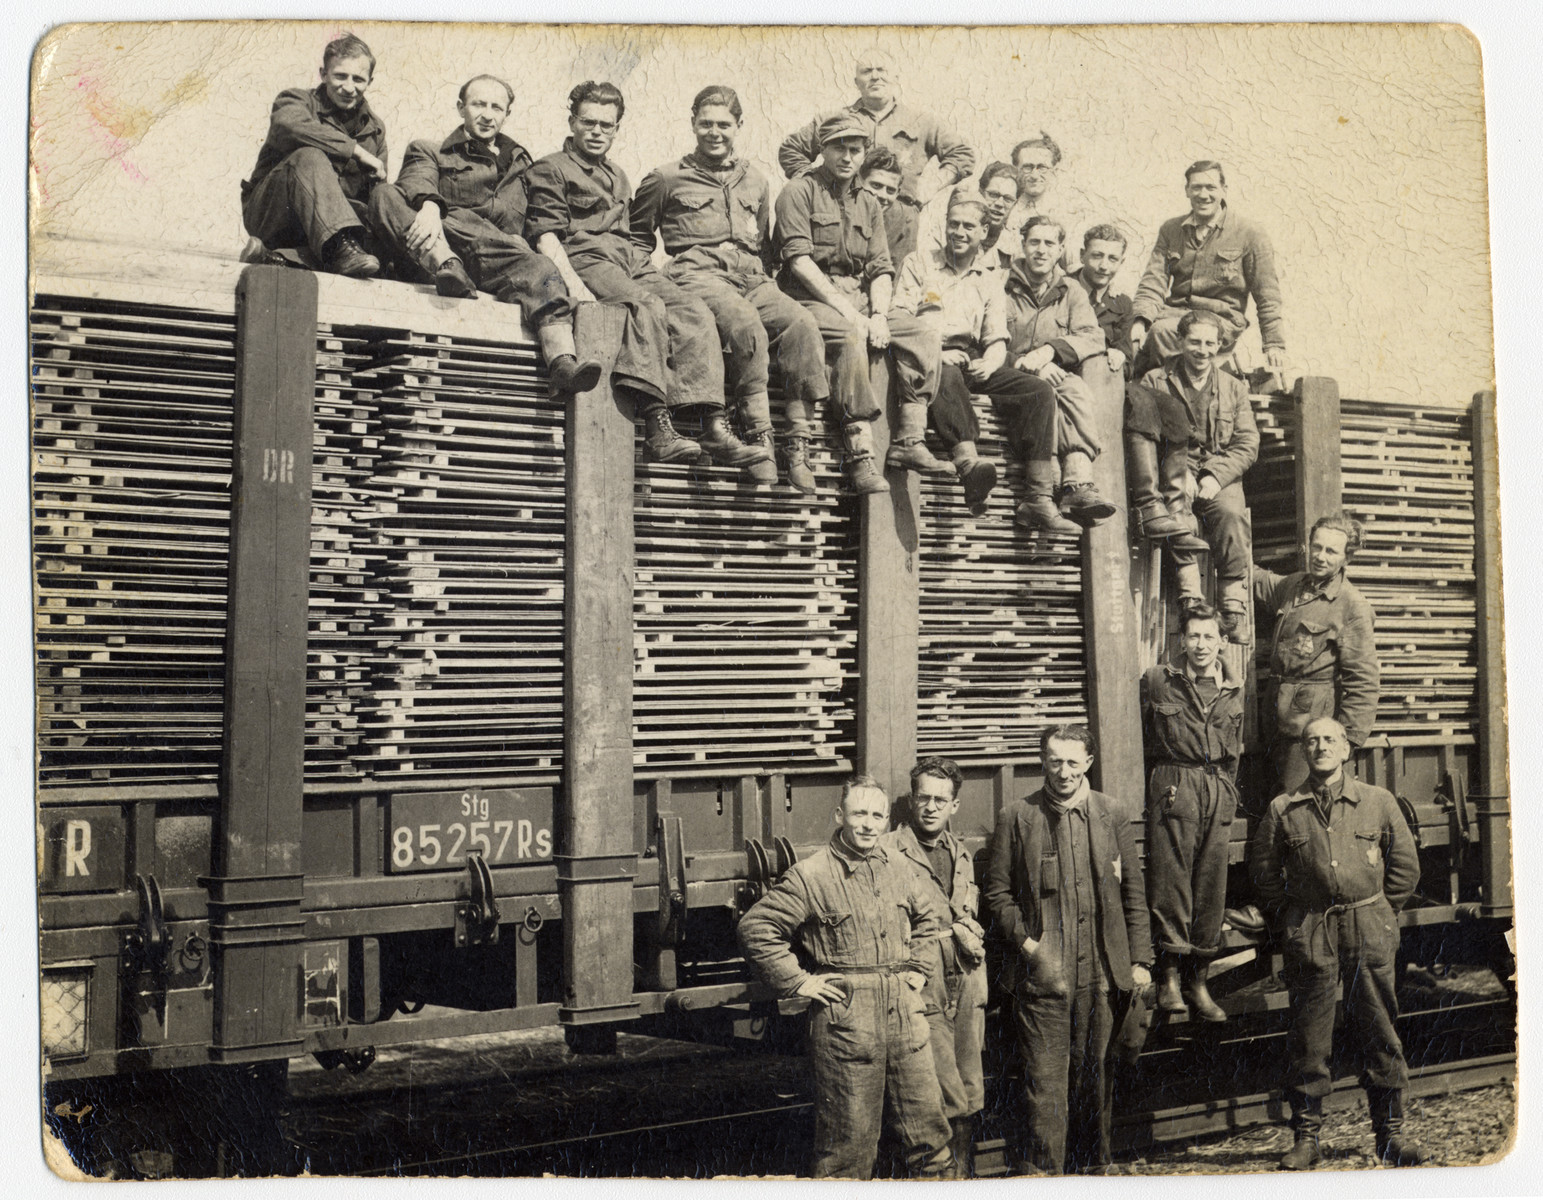 Jewish internees pose on top and next to a railcar loaded with planks of lumber in Westerbork. 

Ignatz Kempler is standing at the base of train (second from right).